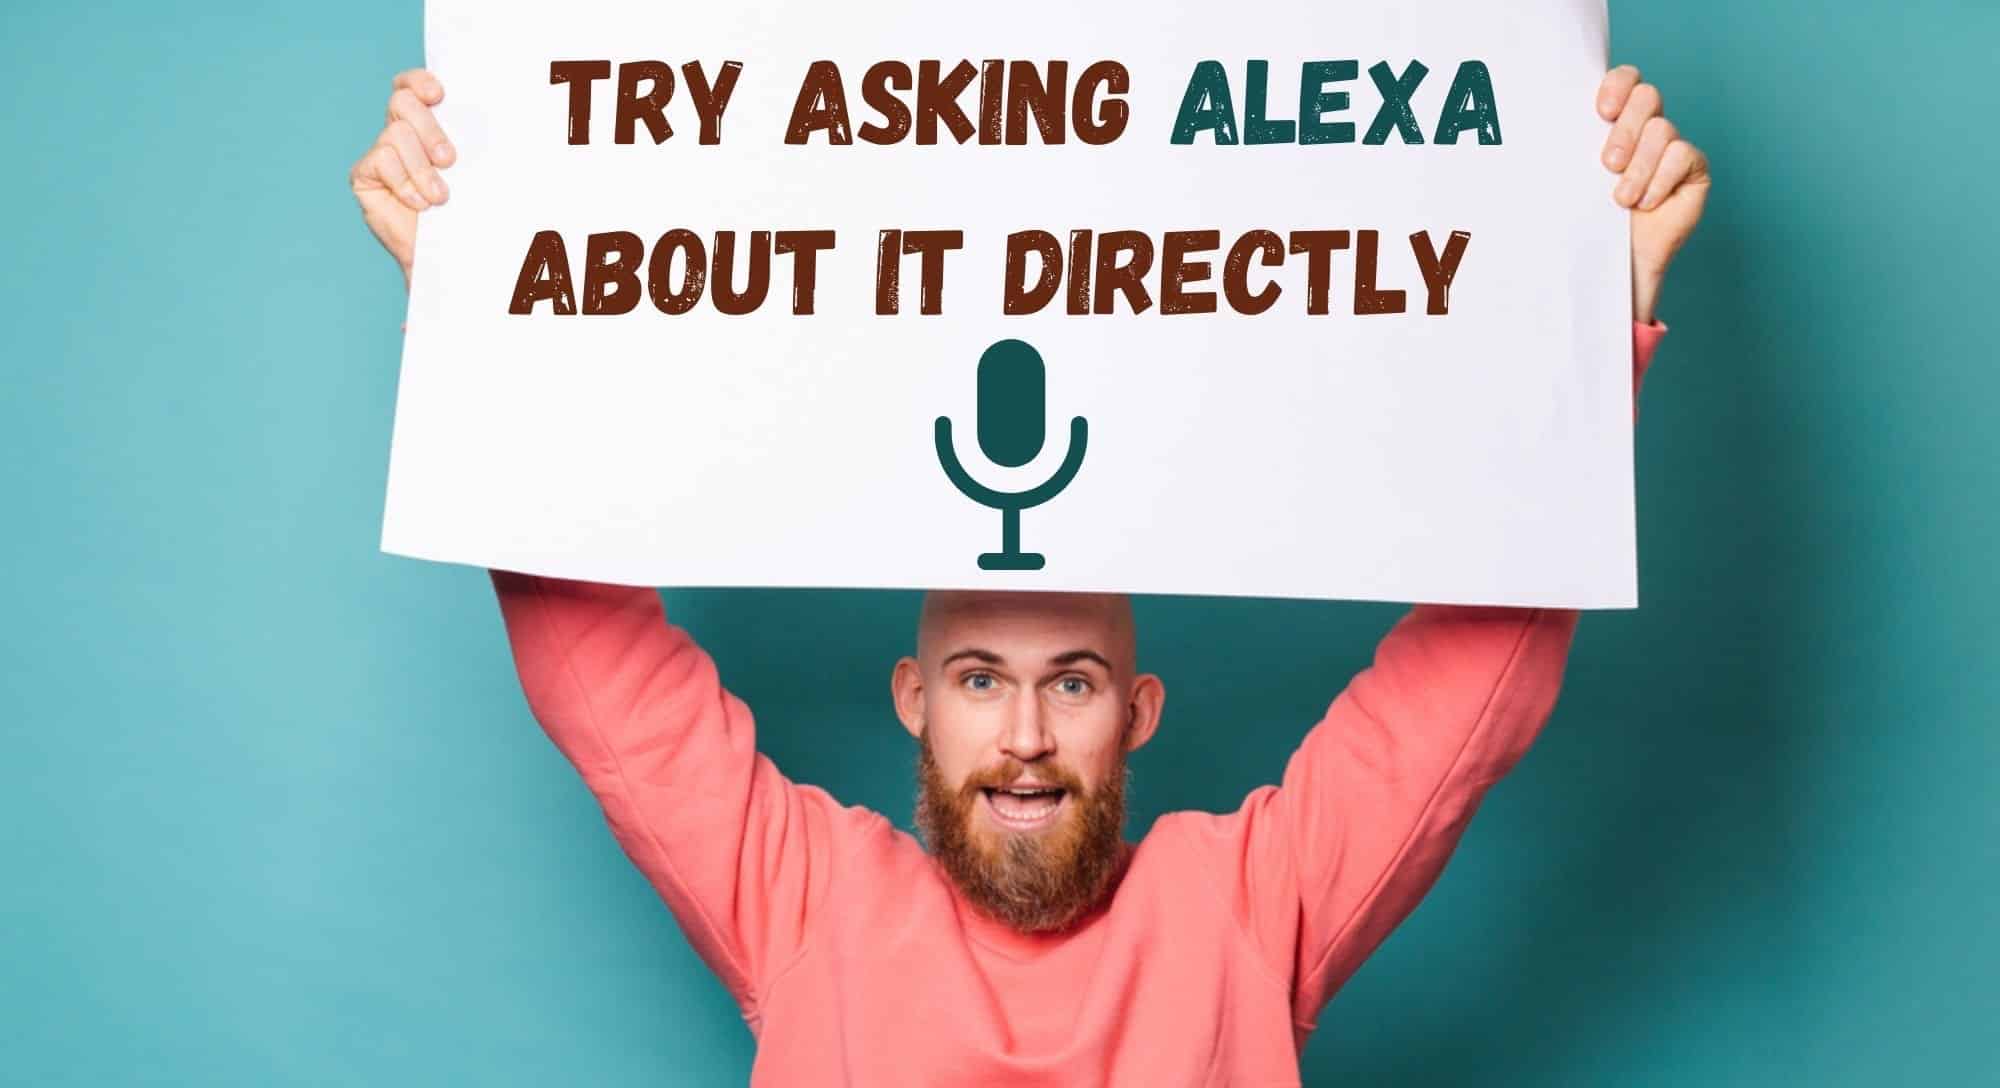 Try asking Alexa about it directly